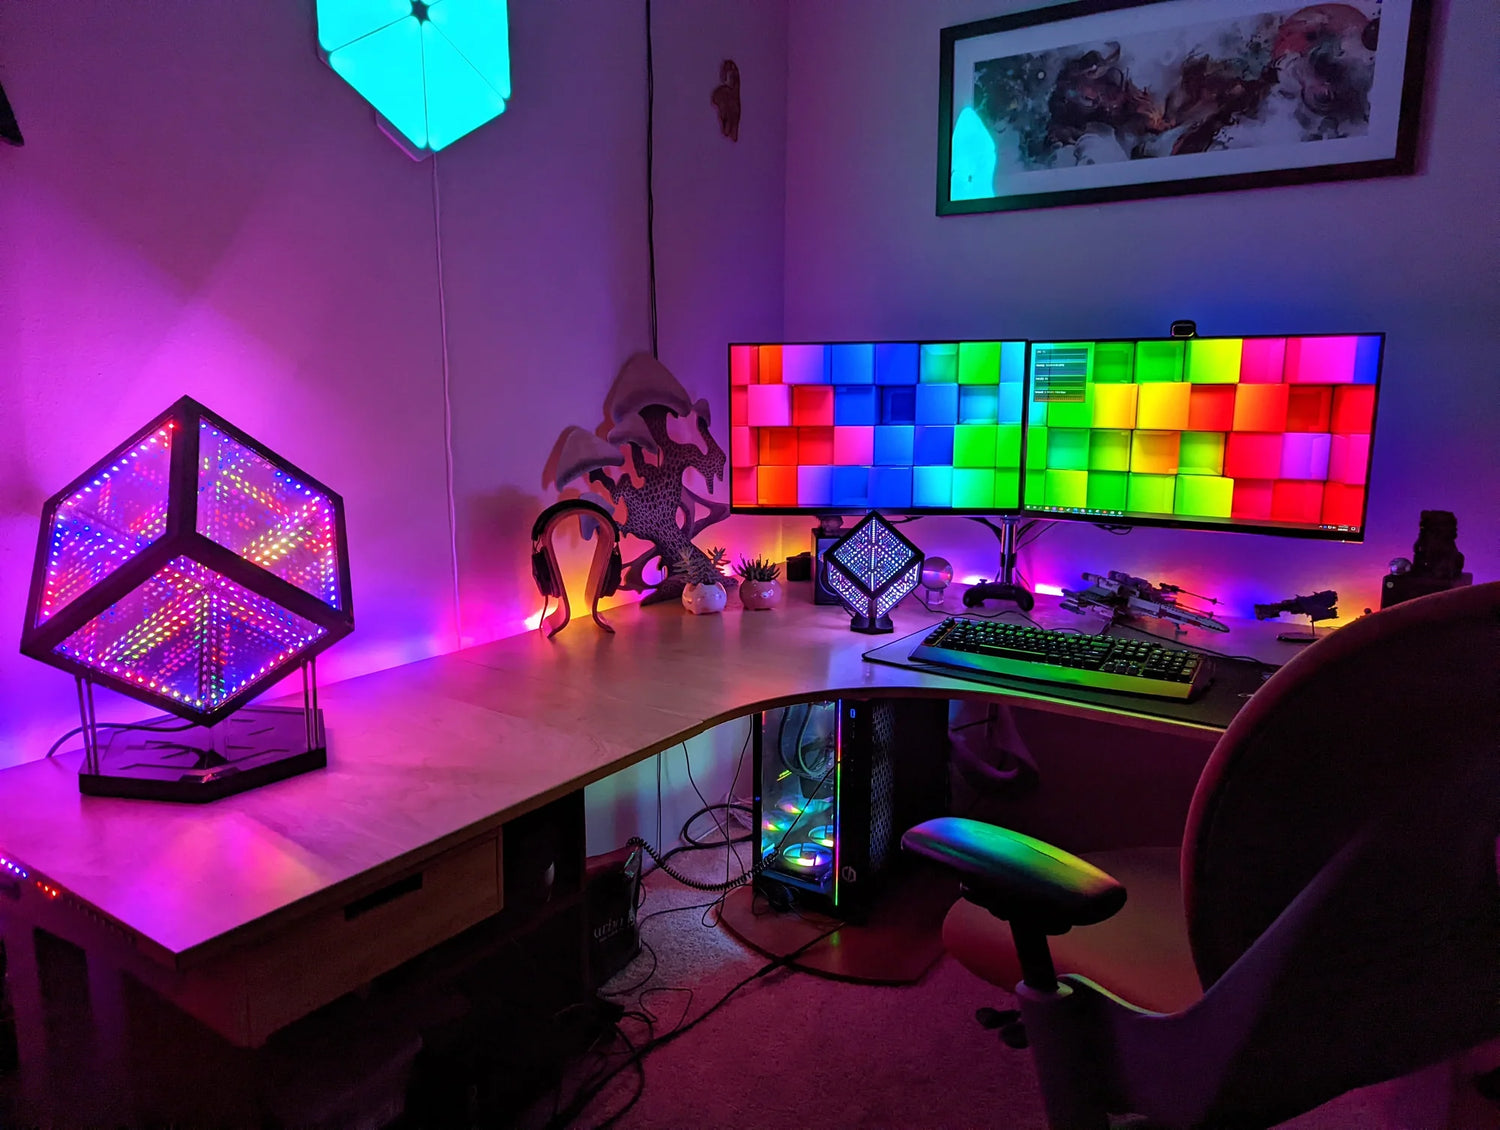  A computer desk with vibrant, best christmas lights.